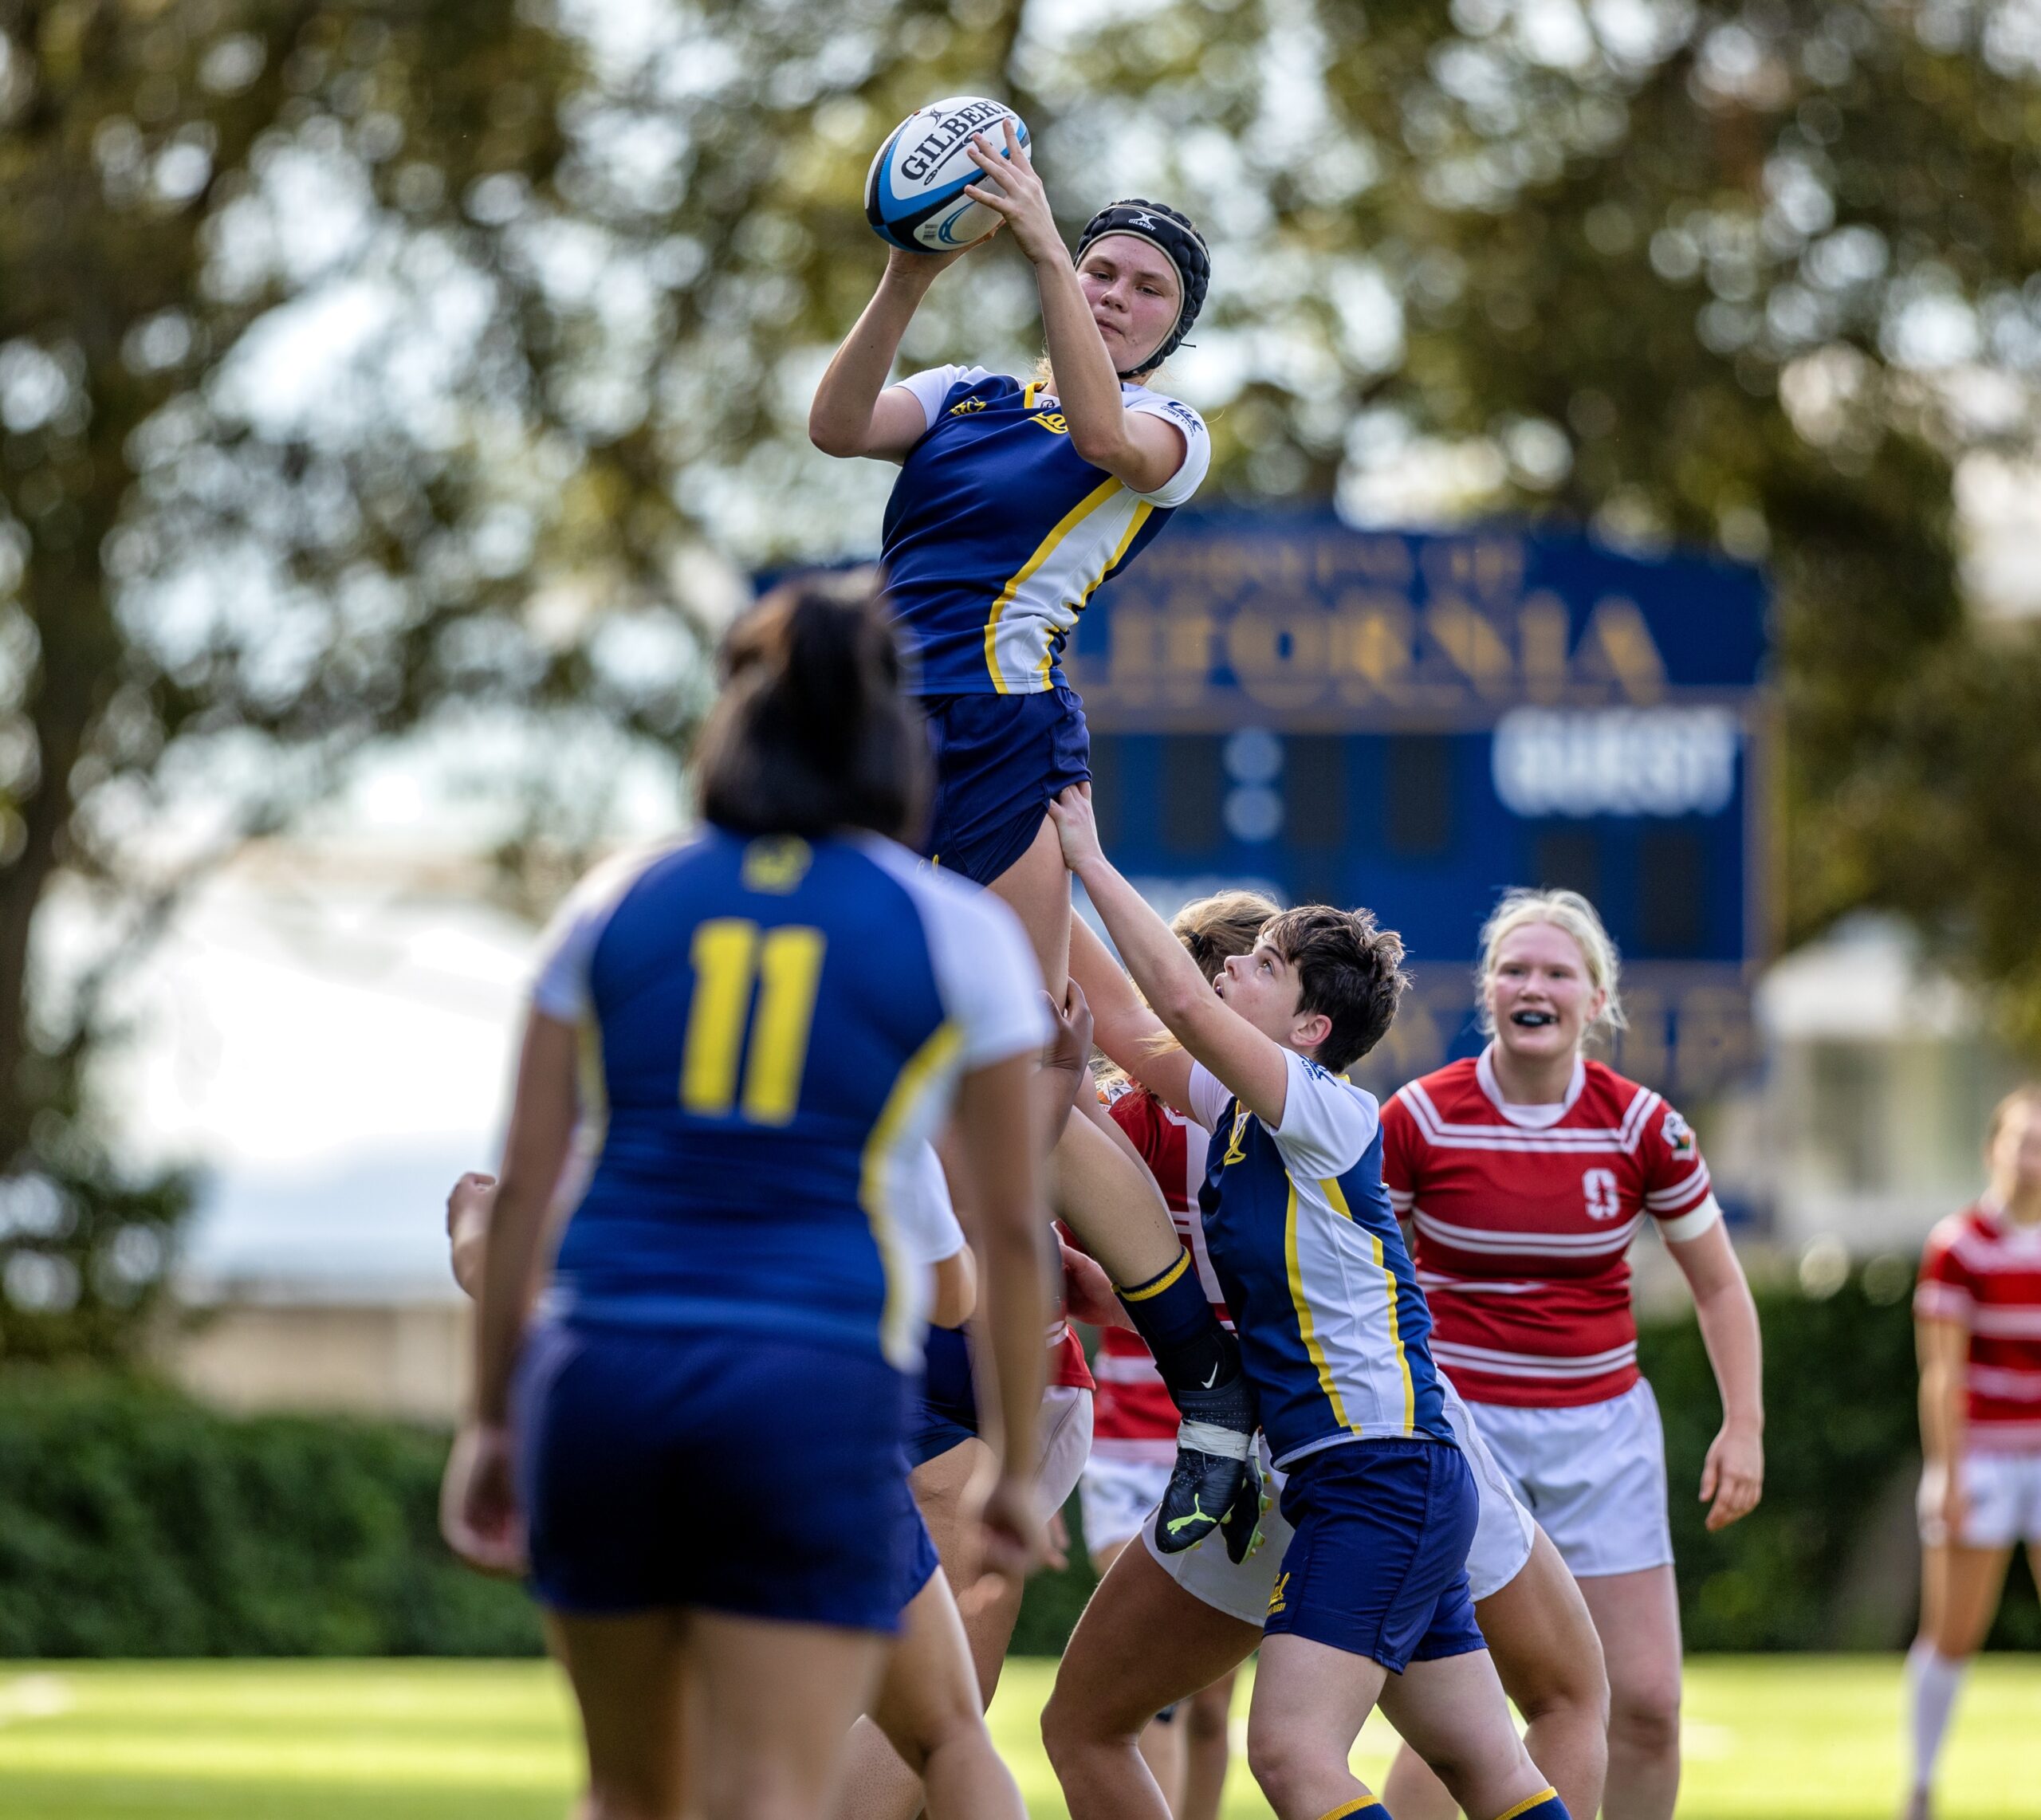 Cal women's rugby